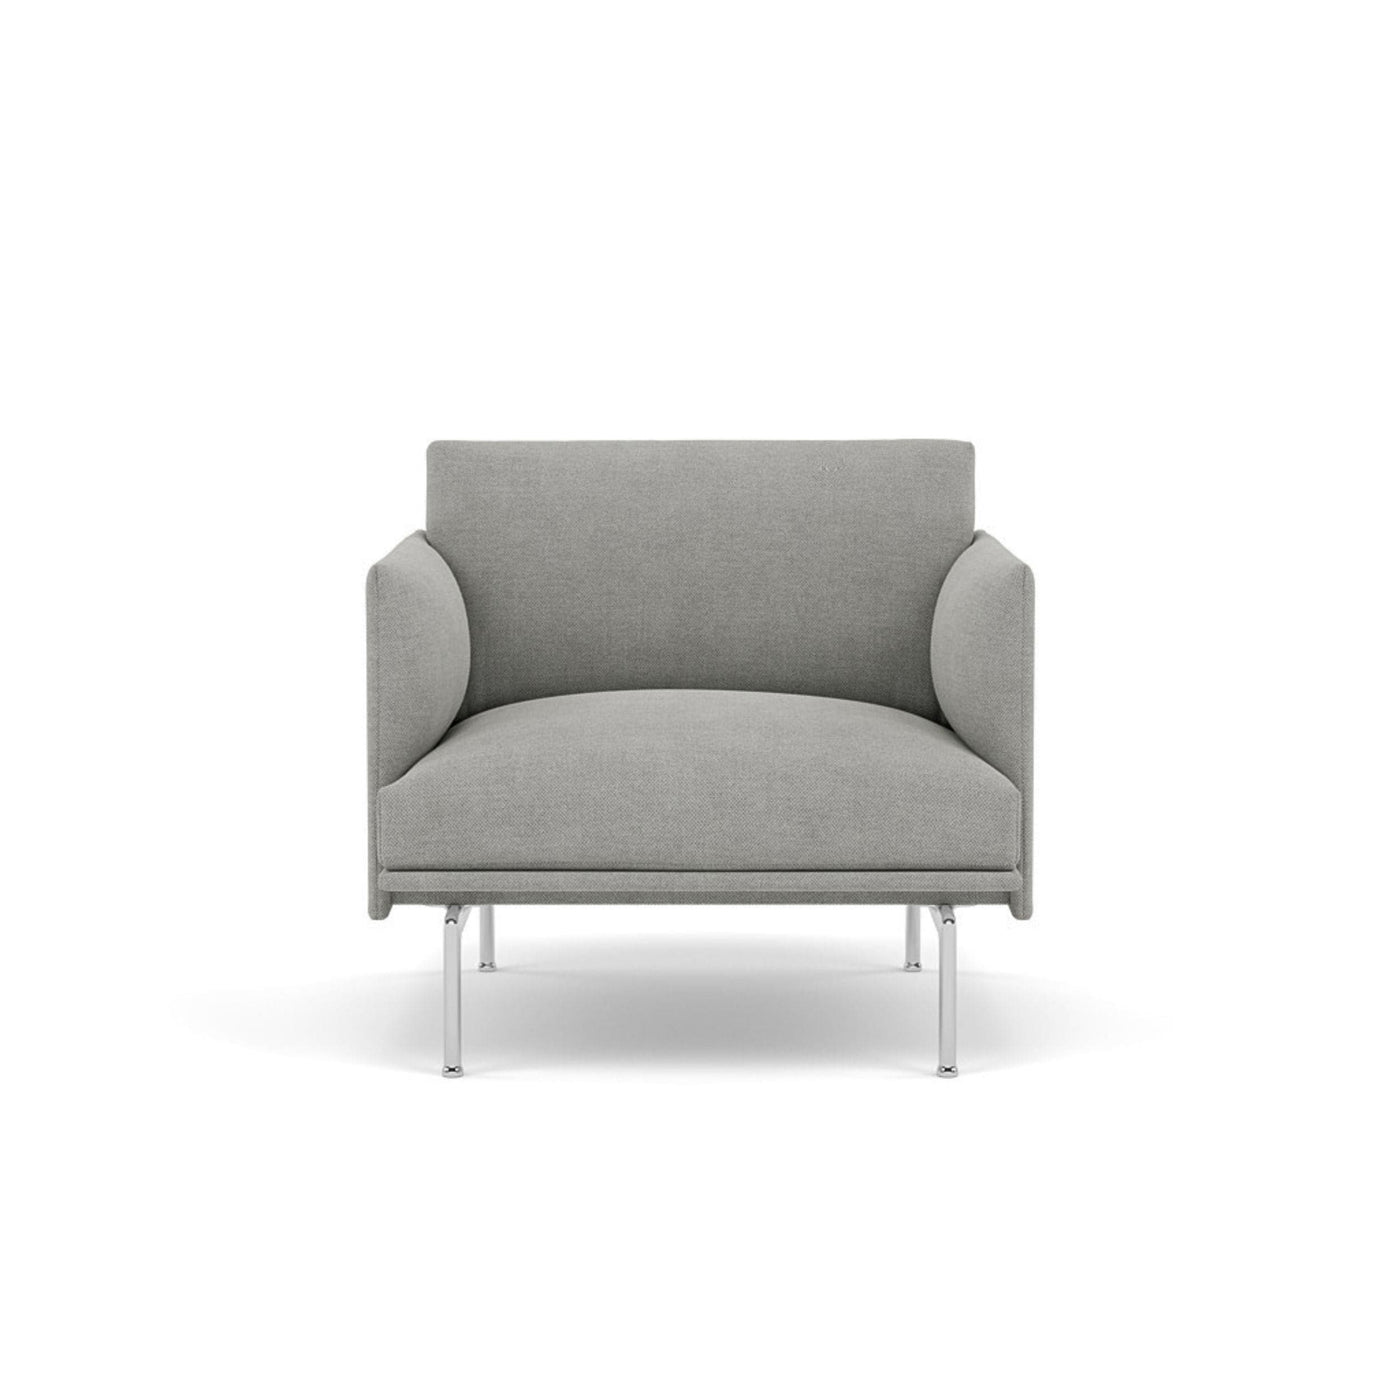 muuto outline studio chair in fiord 151 and polished aluminium legs. Available at someday designs. #colour_fiord-151